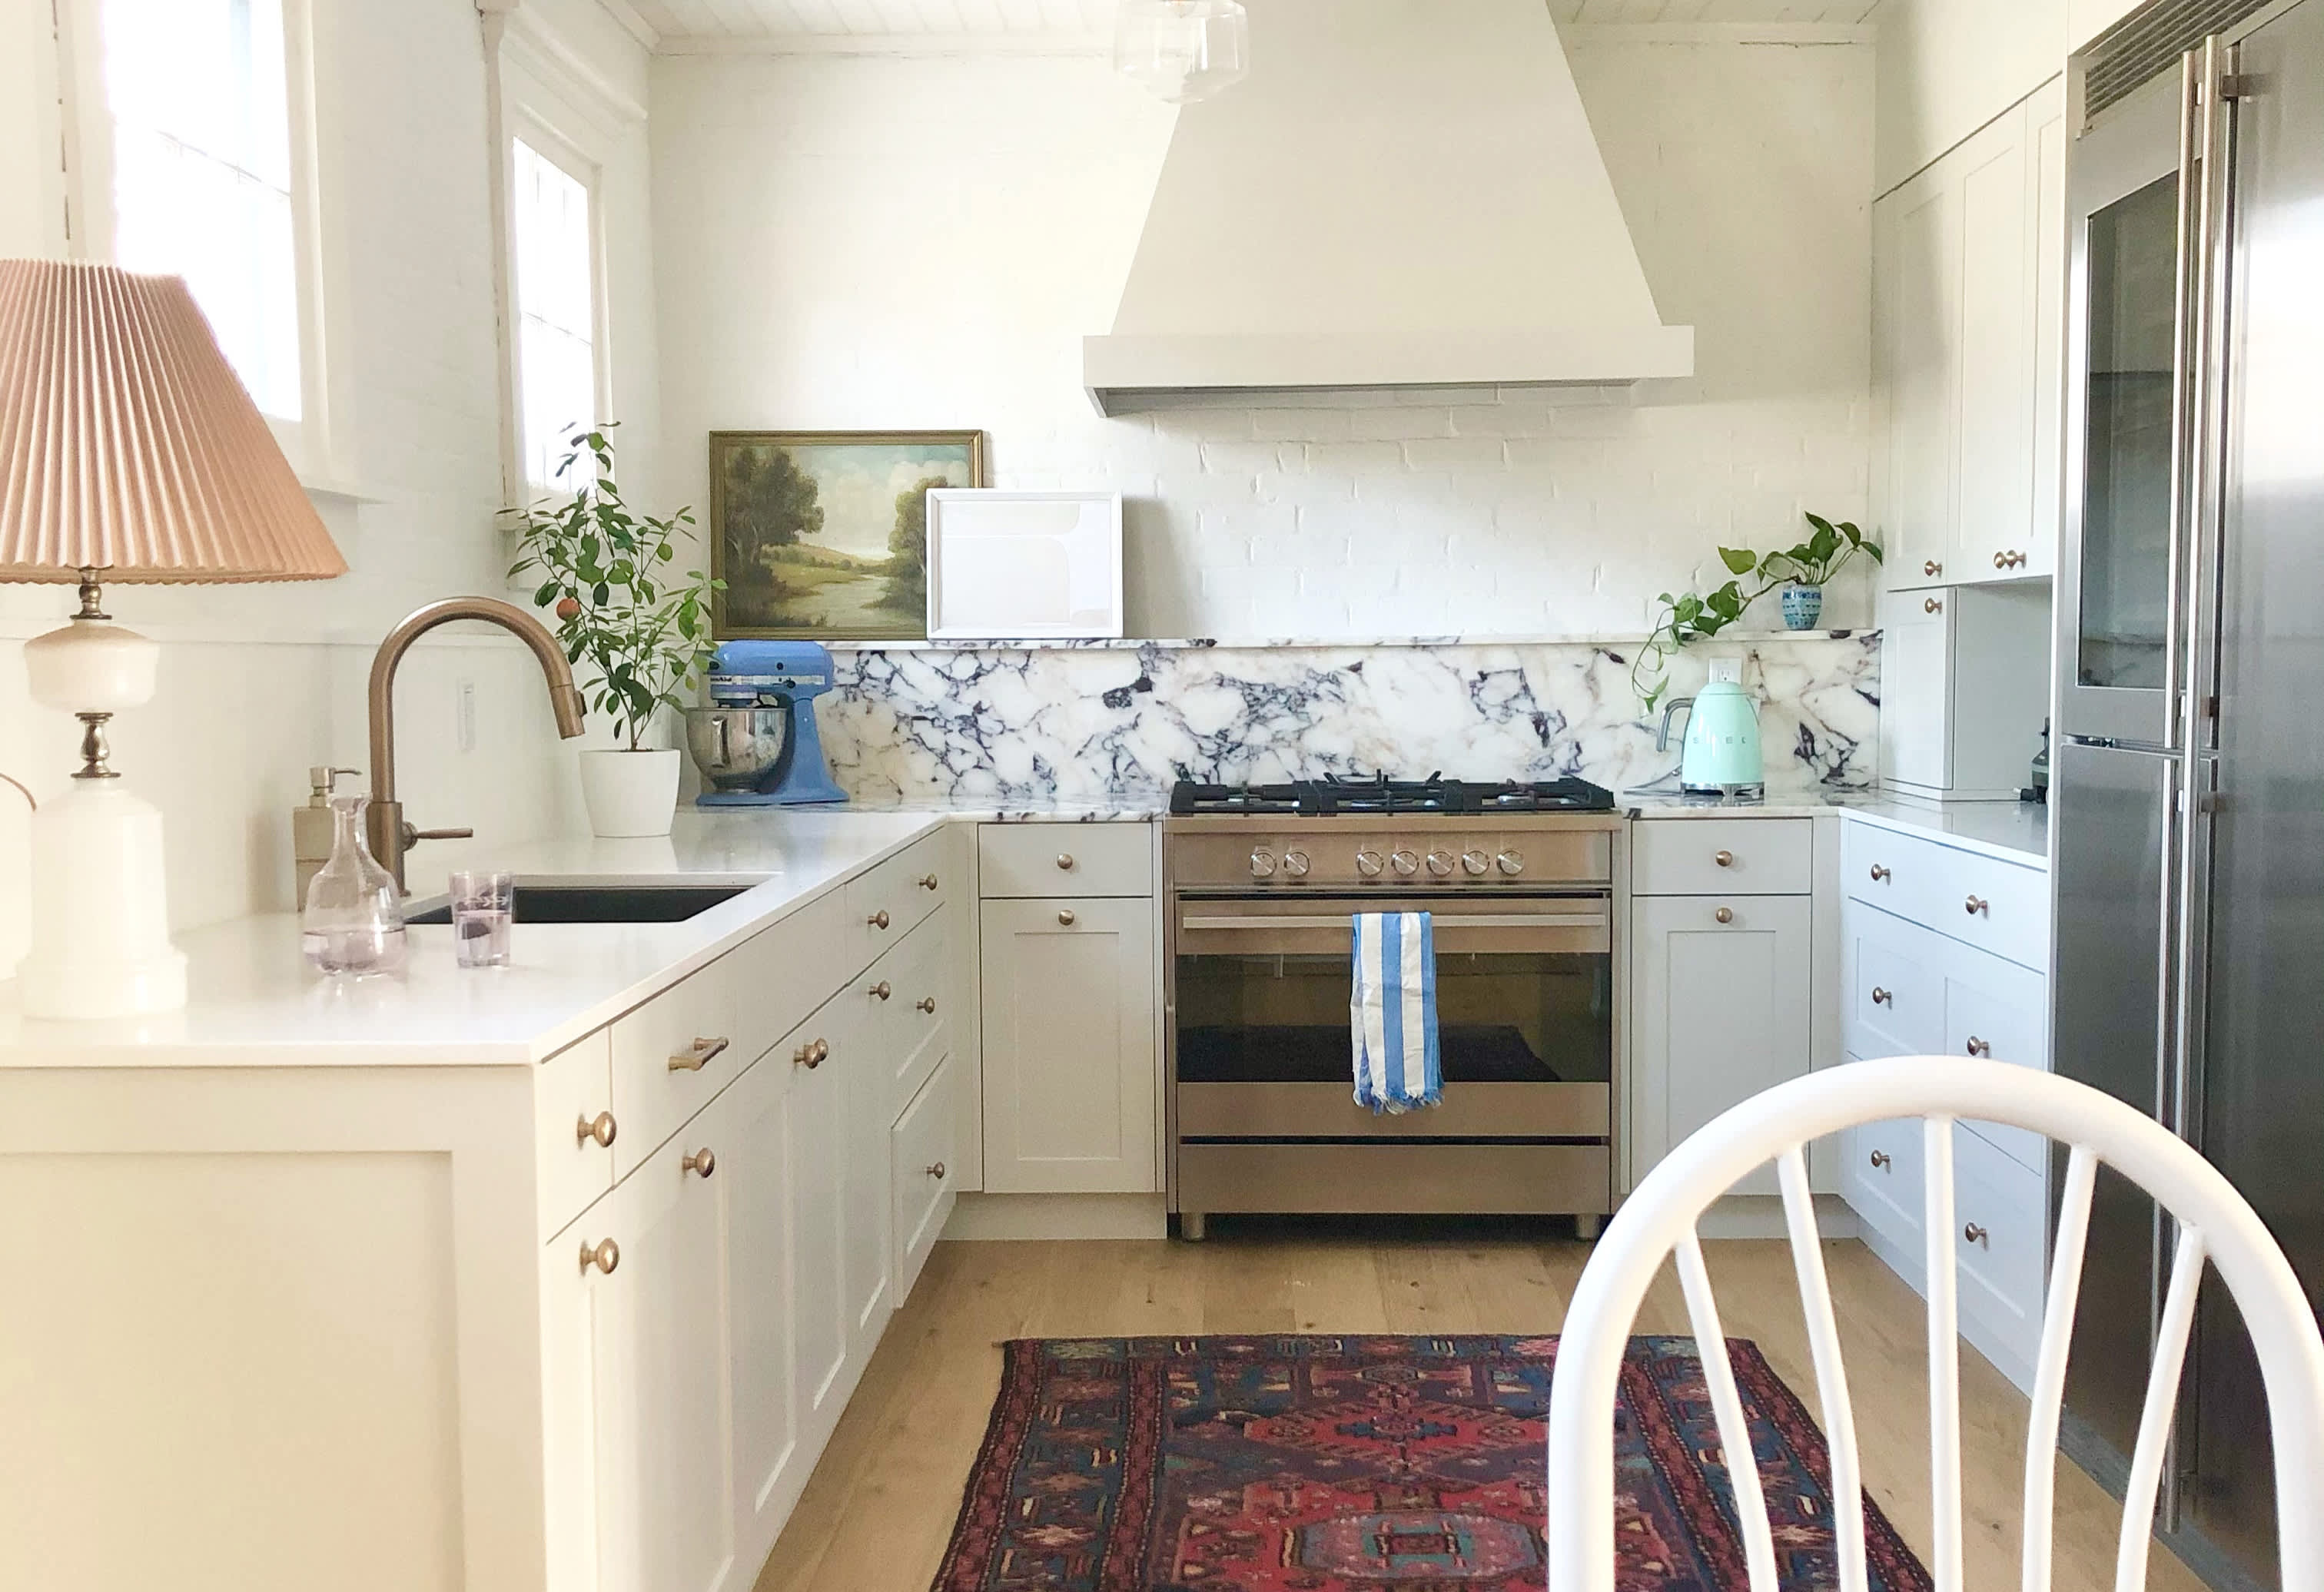 37 Bright, White Kitchens To Emulate Your Own After